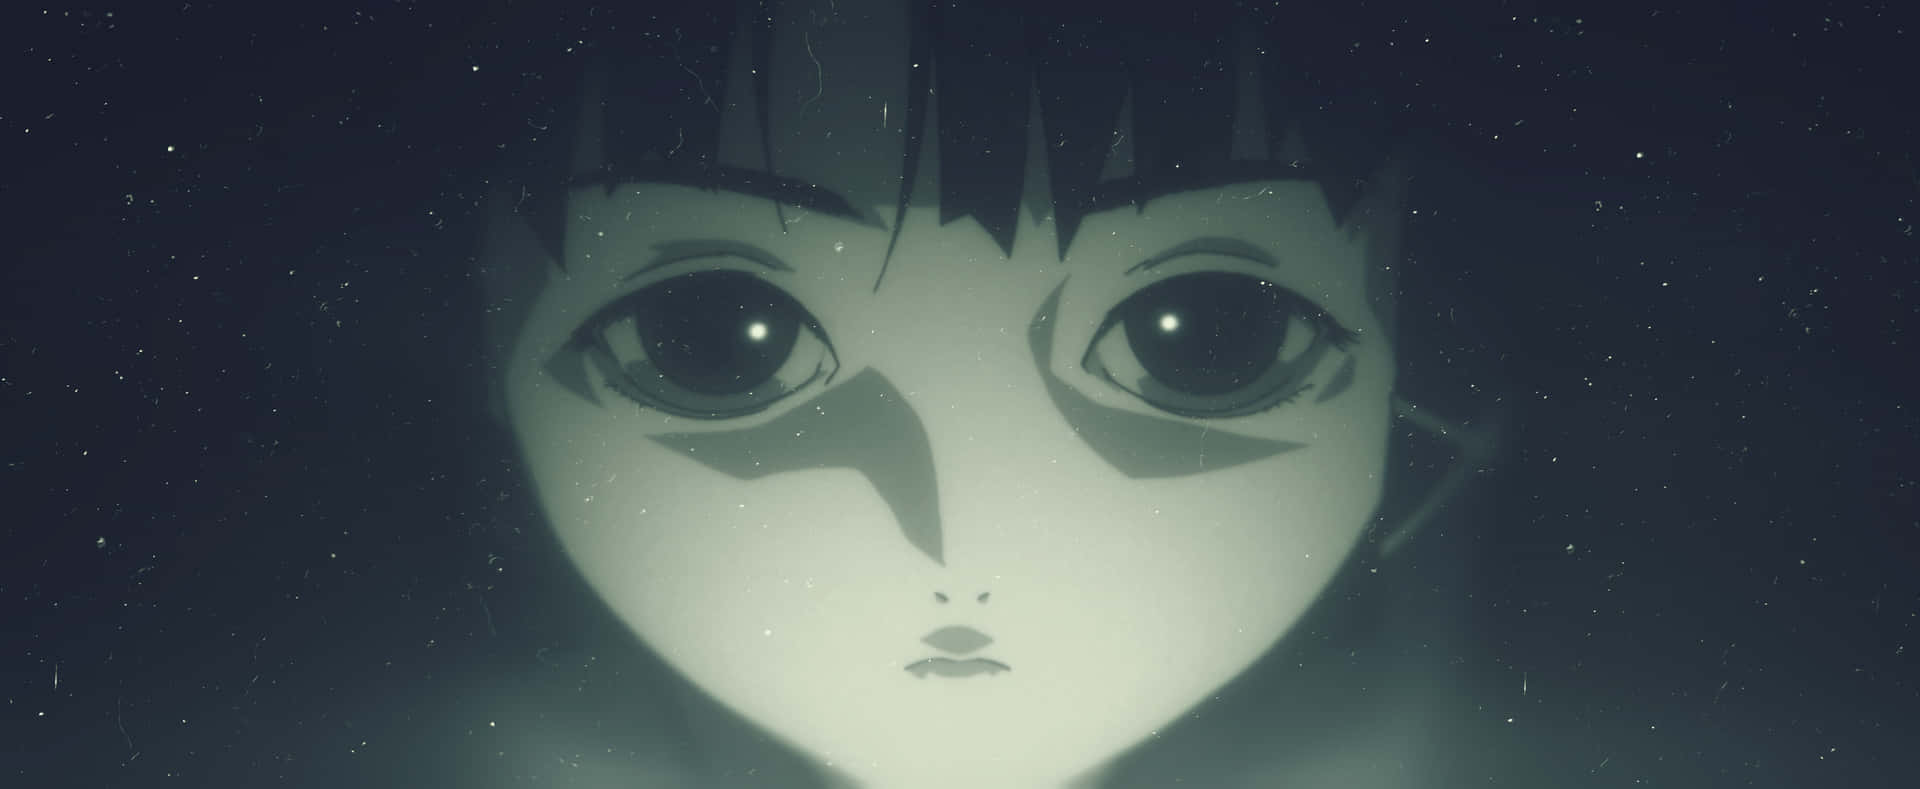 Explore the Digital World with Serial Experiments Lain Wallpaper